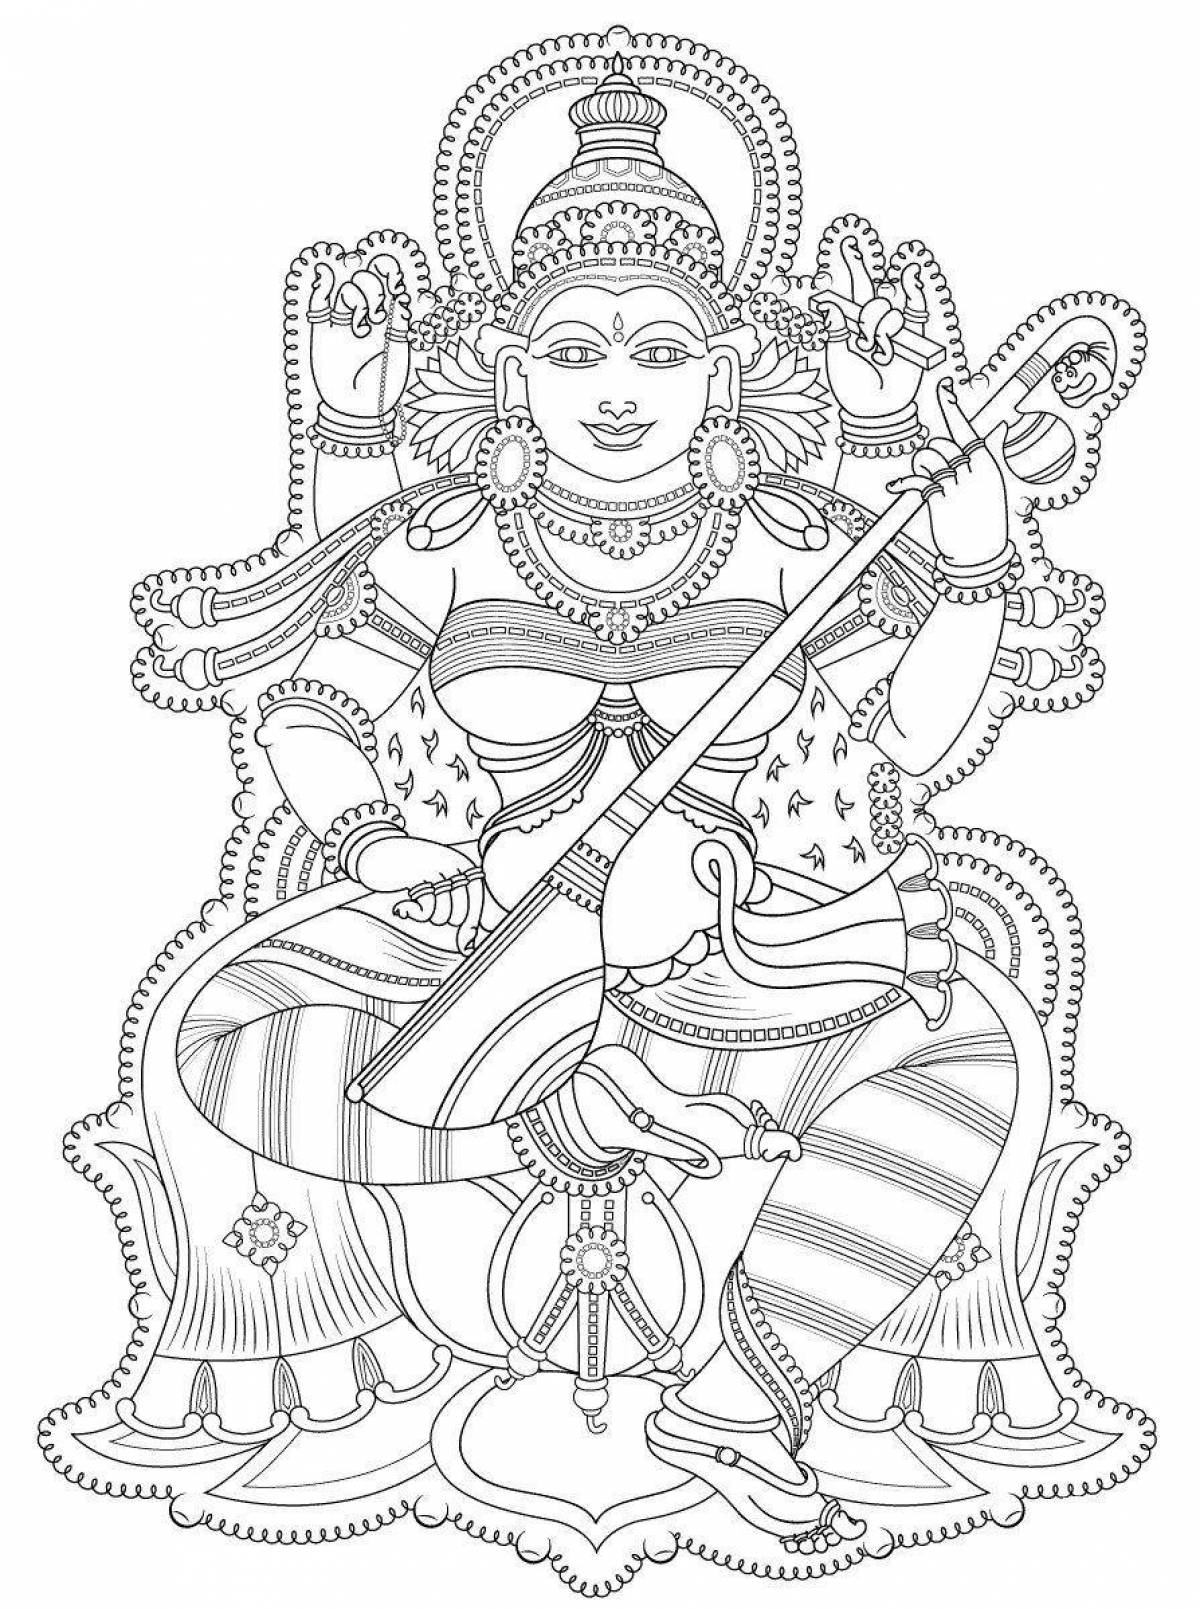 Delightful Indian coloring book